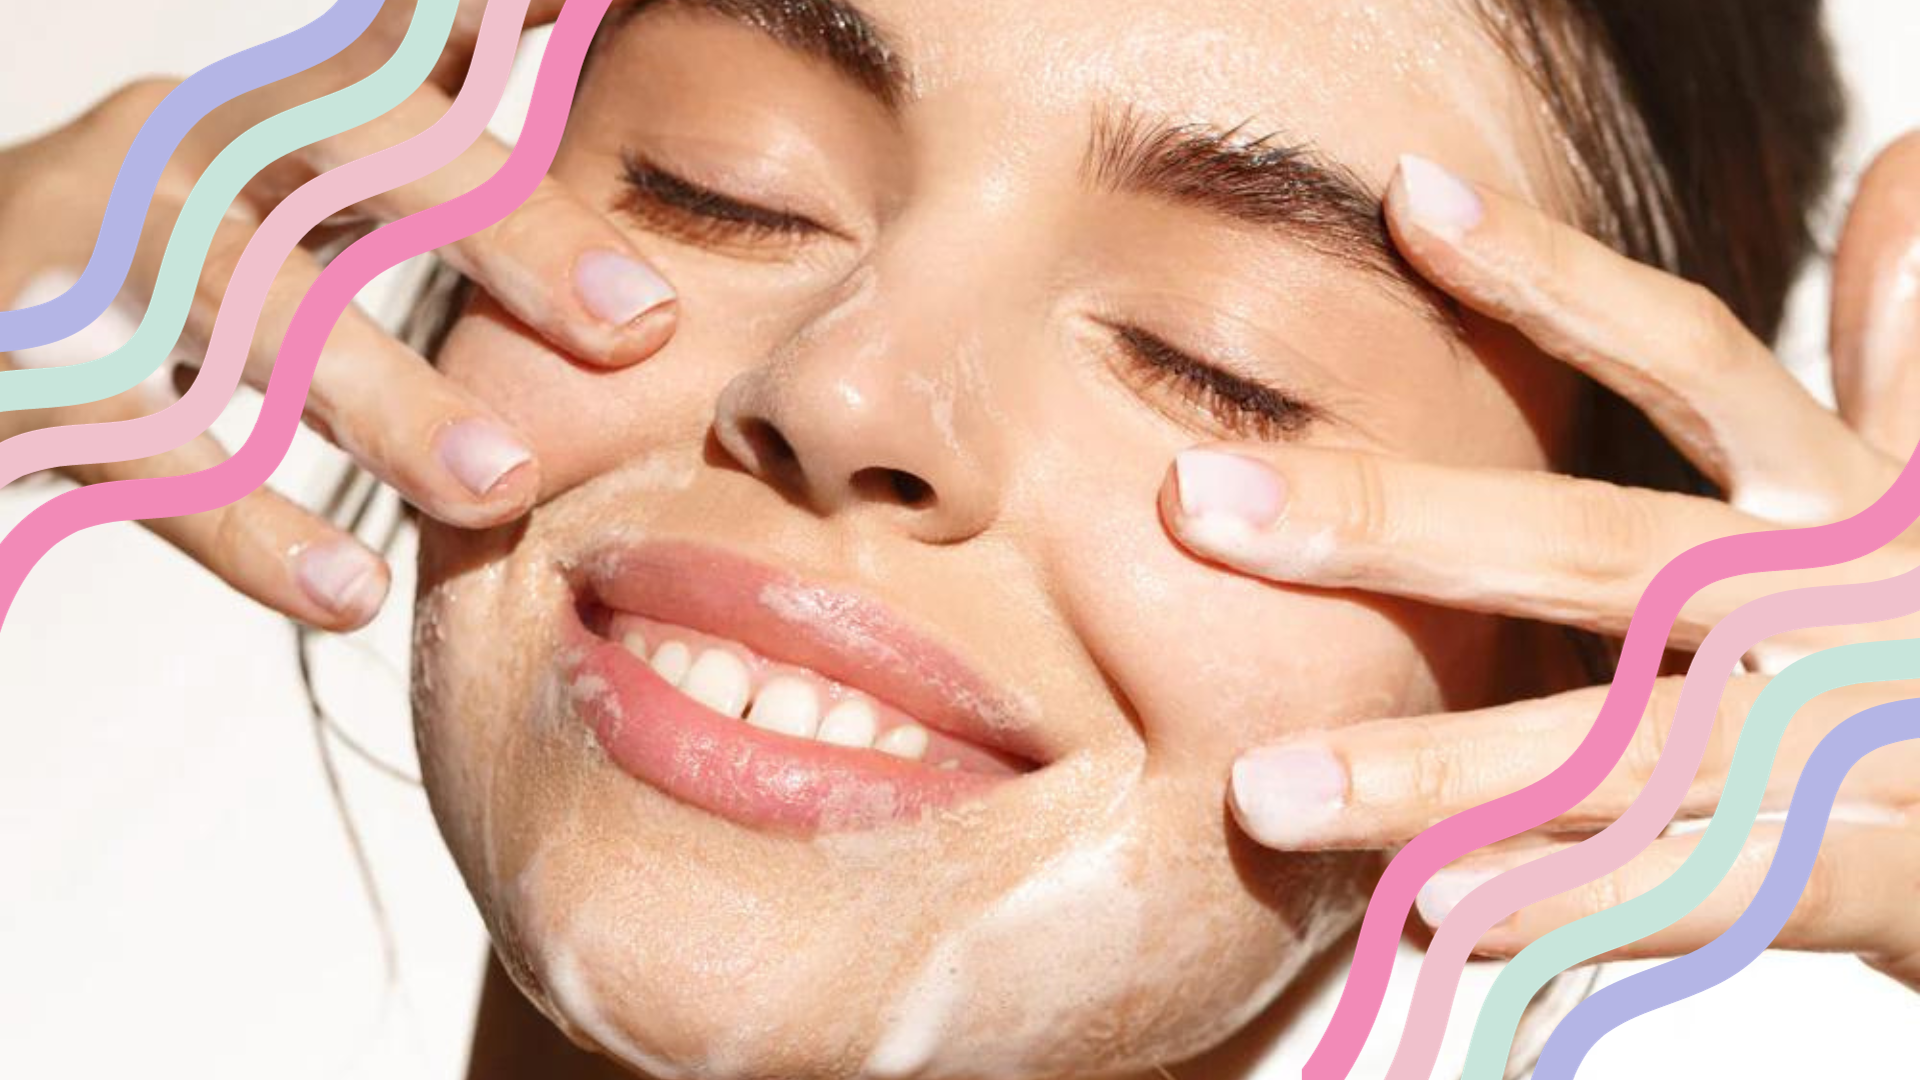 Skin-Care 101: How to Clean Your Face Based on Your Skin Type